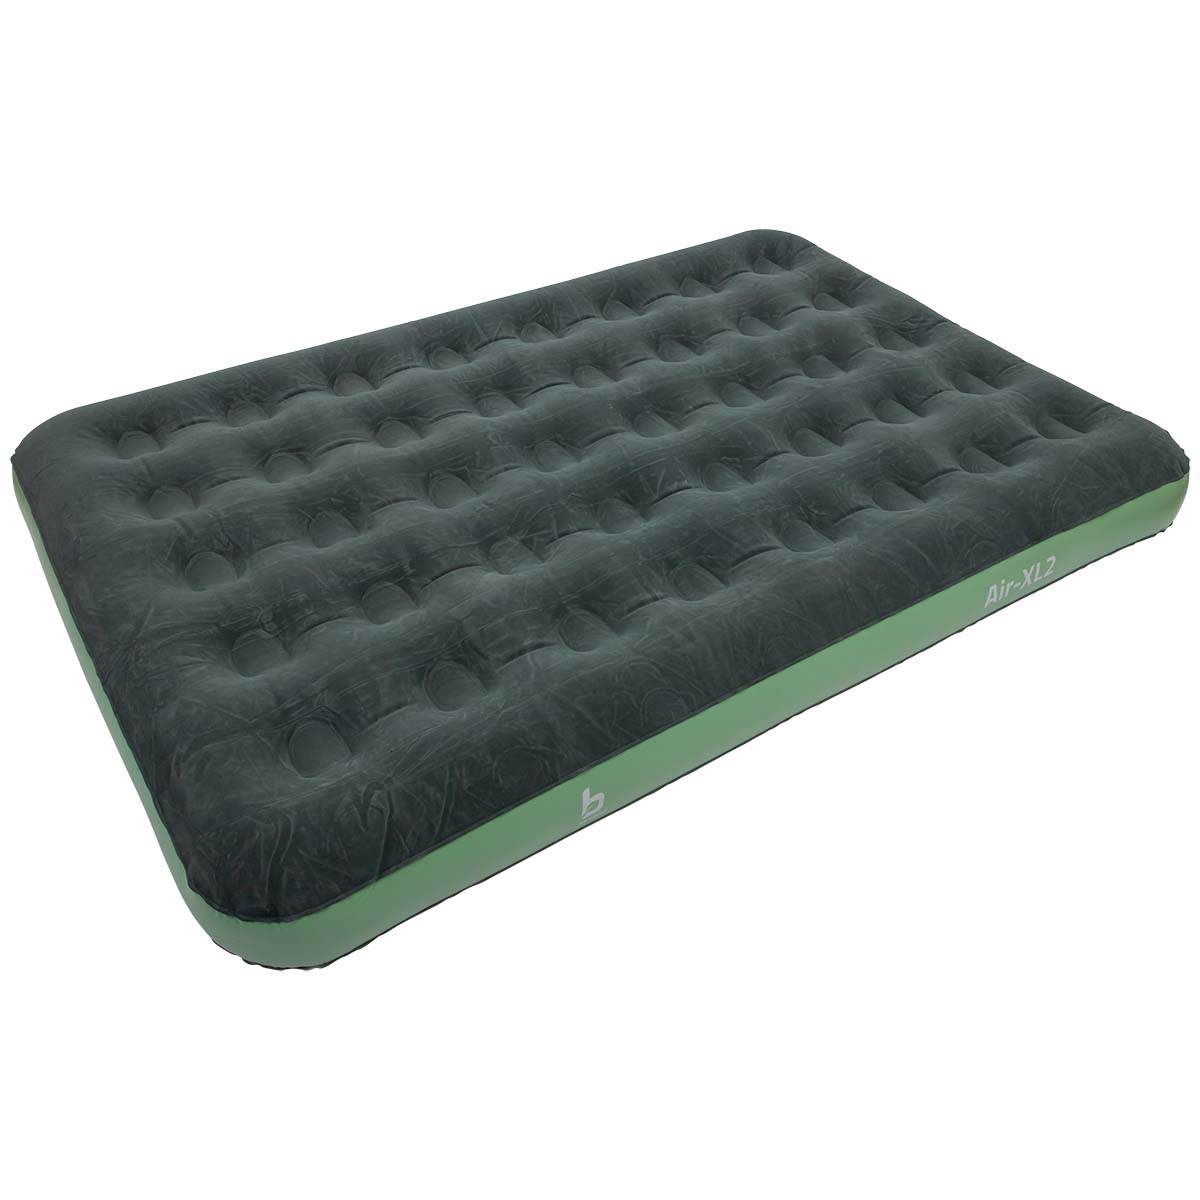 3107001 A comfortable, durable and extra long air mattress. Has a large filling opening with double valve. This allows the air mattress to rapidly inflate and deflate. Equipped with an extra soft suede top layer for extra comfort.